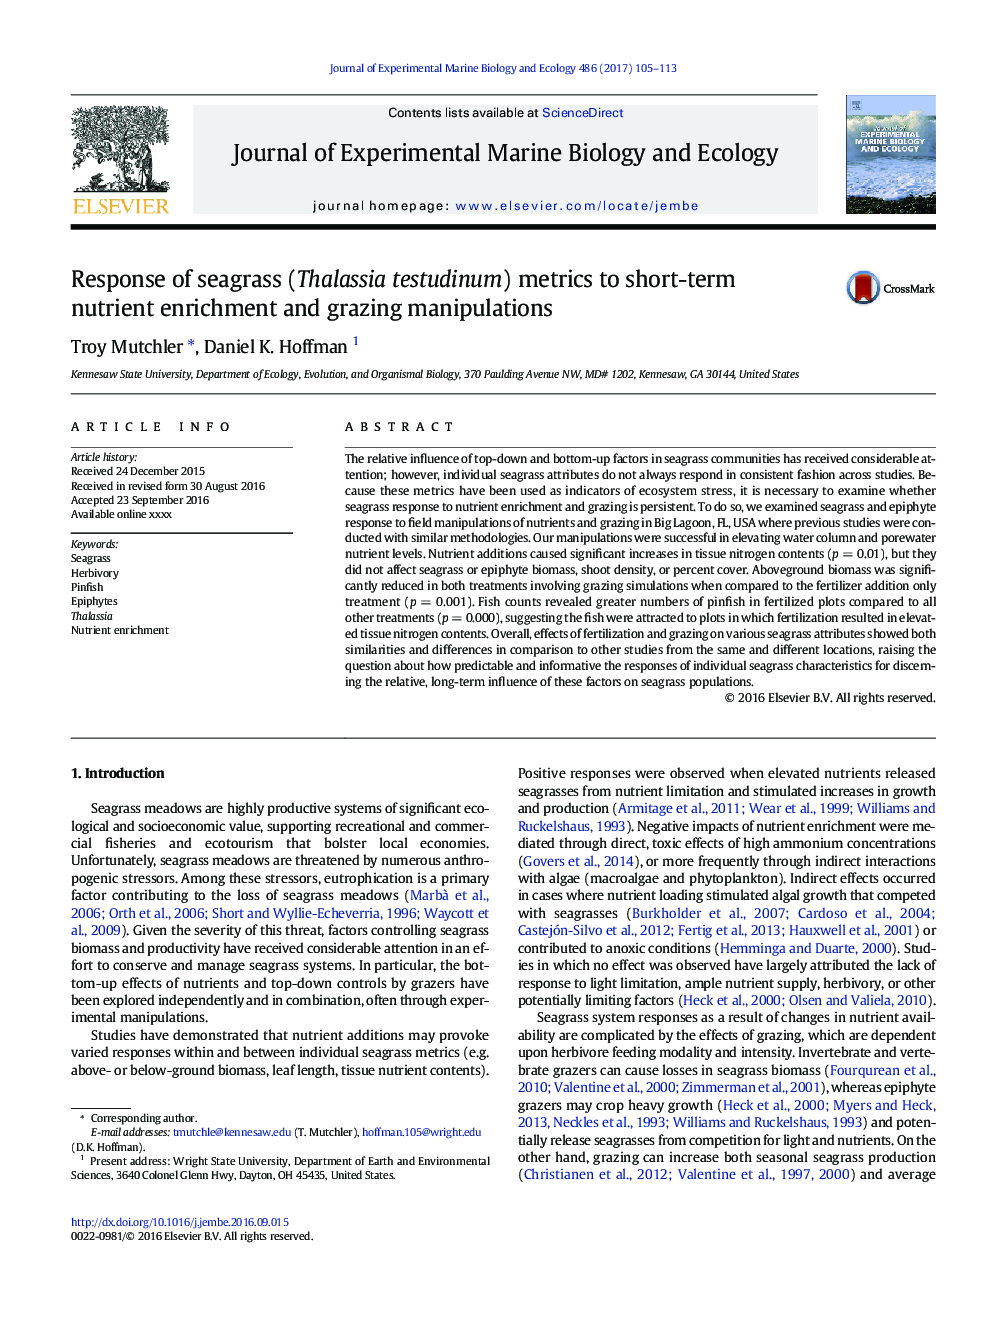 Response of seagrass (Thalassia testudinum) metrics to short-term nutrient enrichment and grazing manipulations